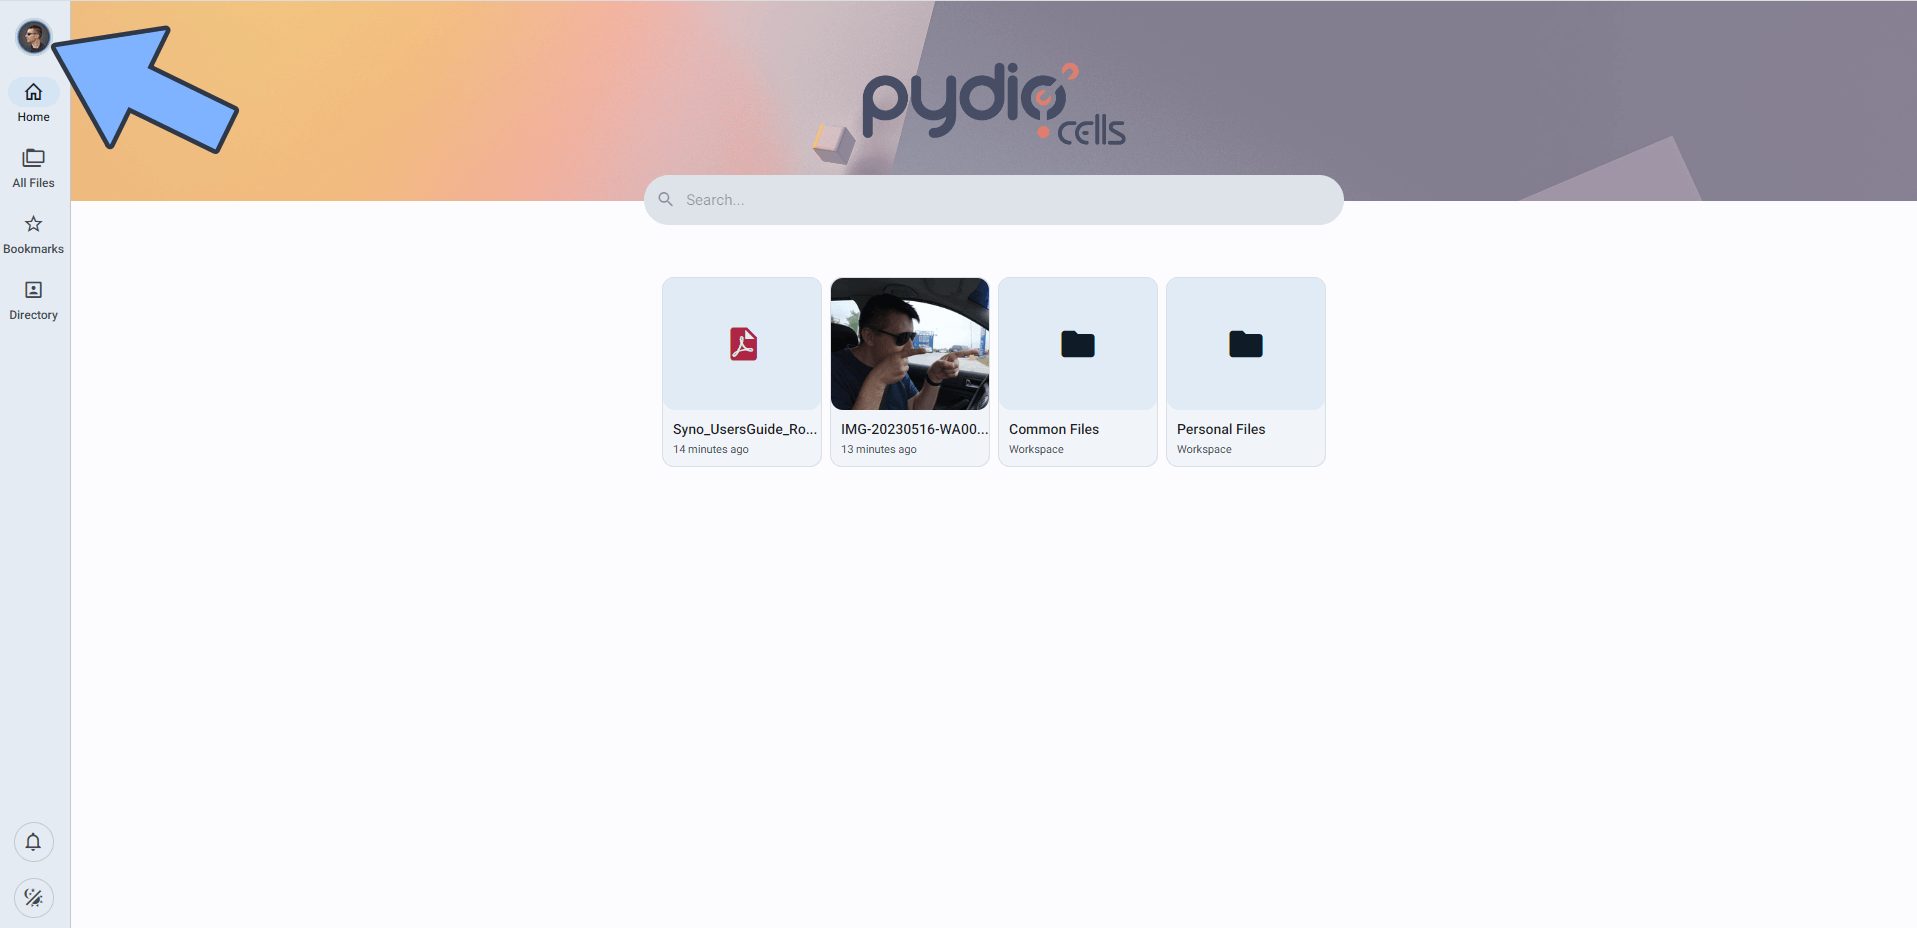 Synology Pydio Cells Set up Email Notification 1